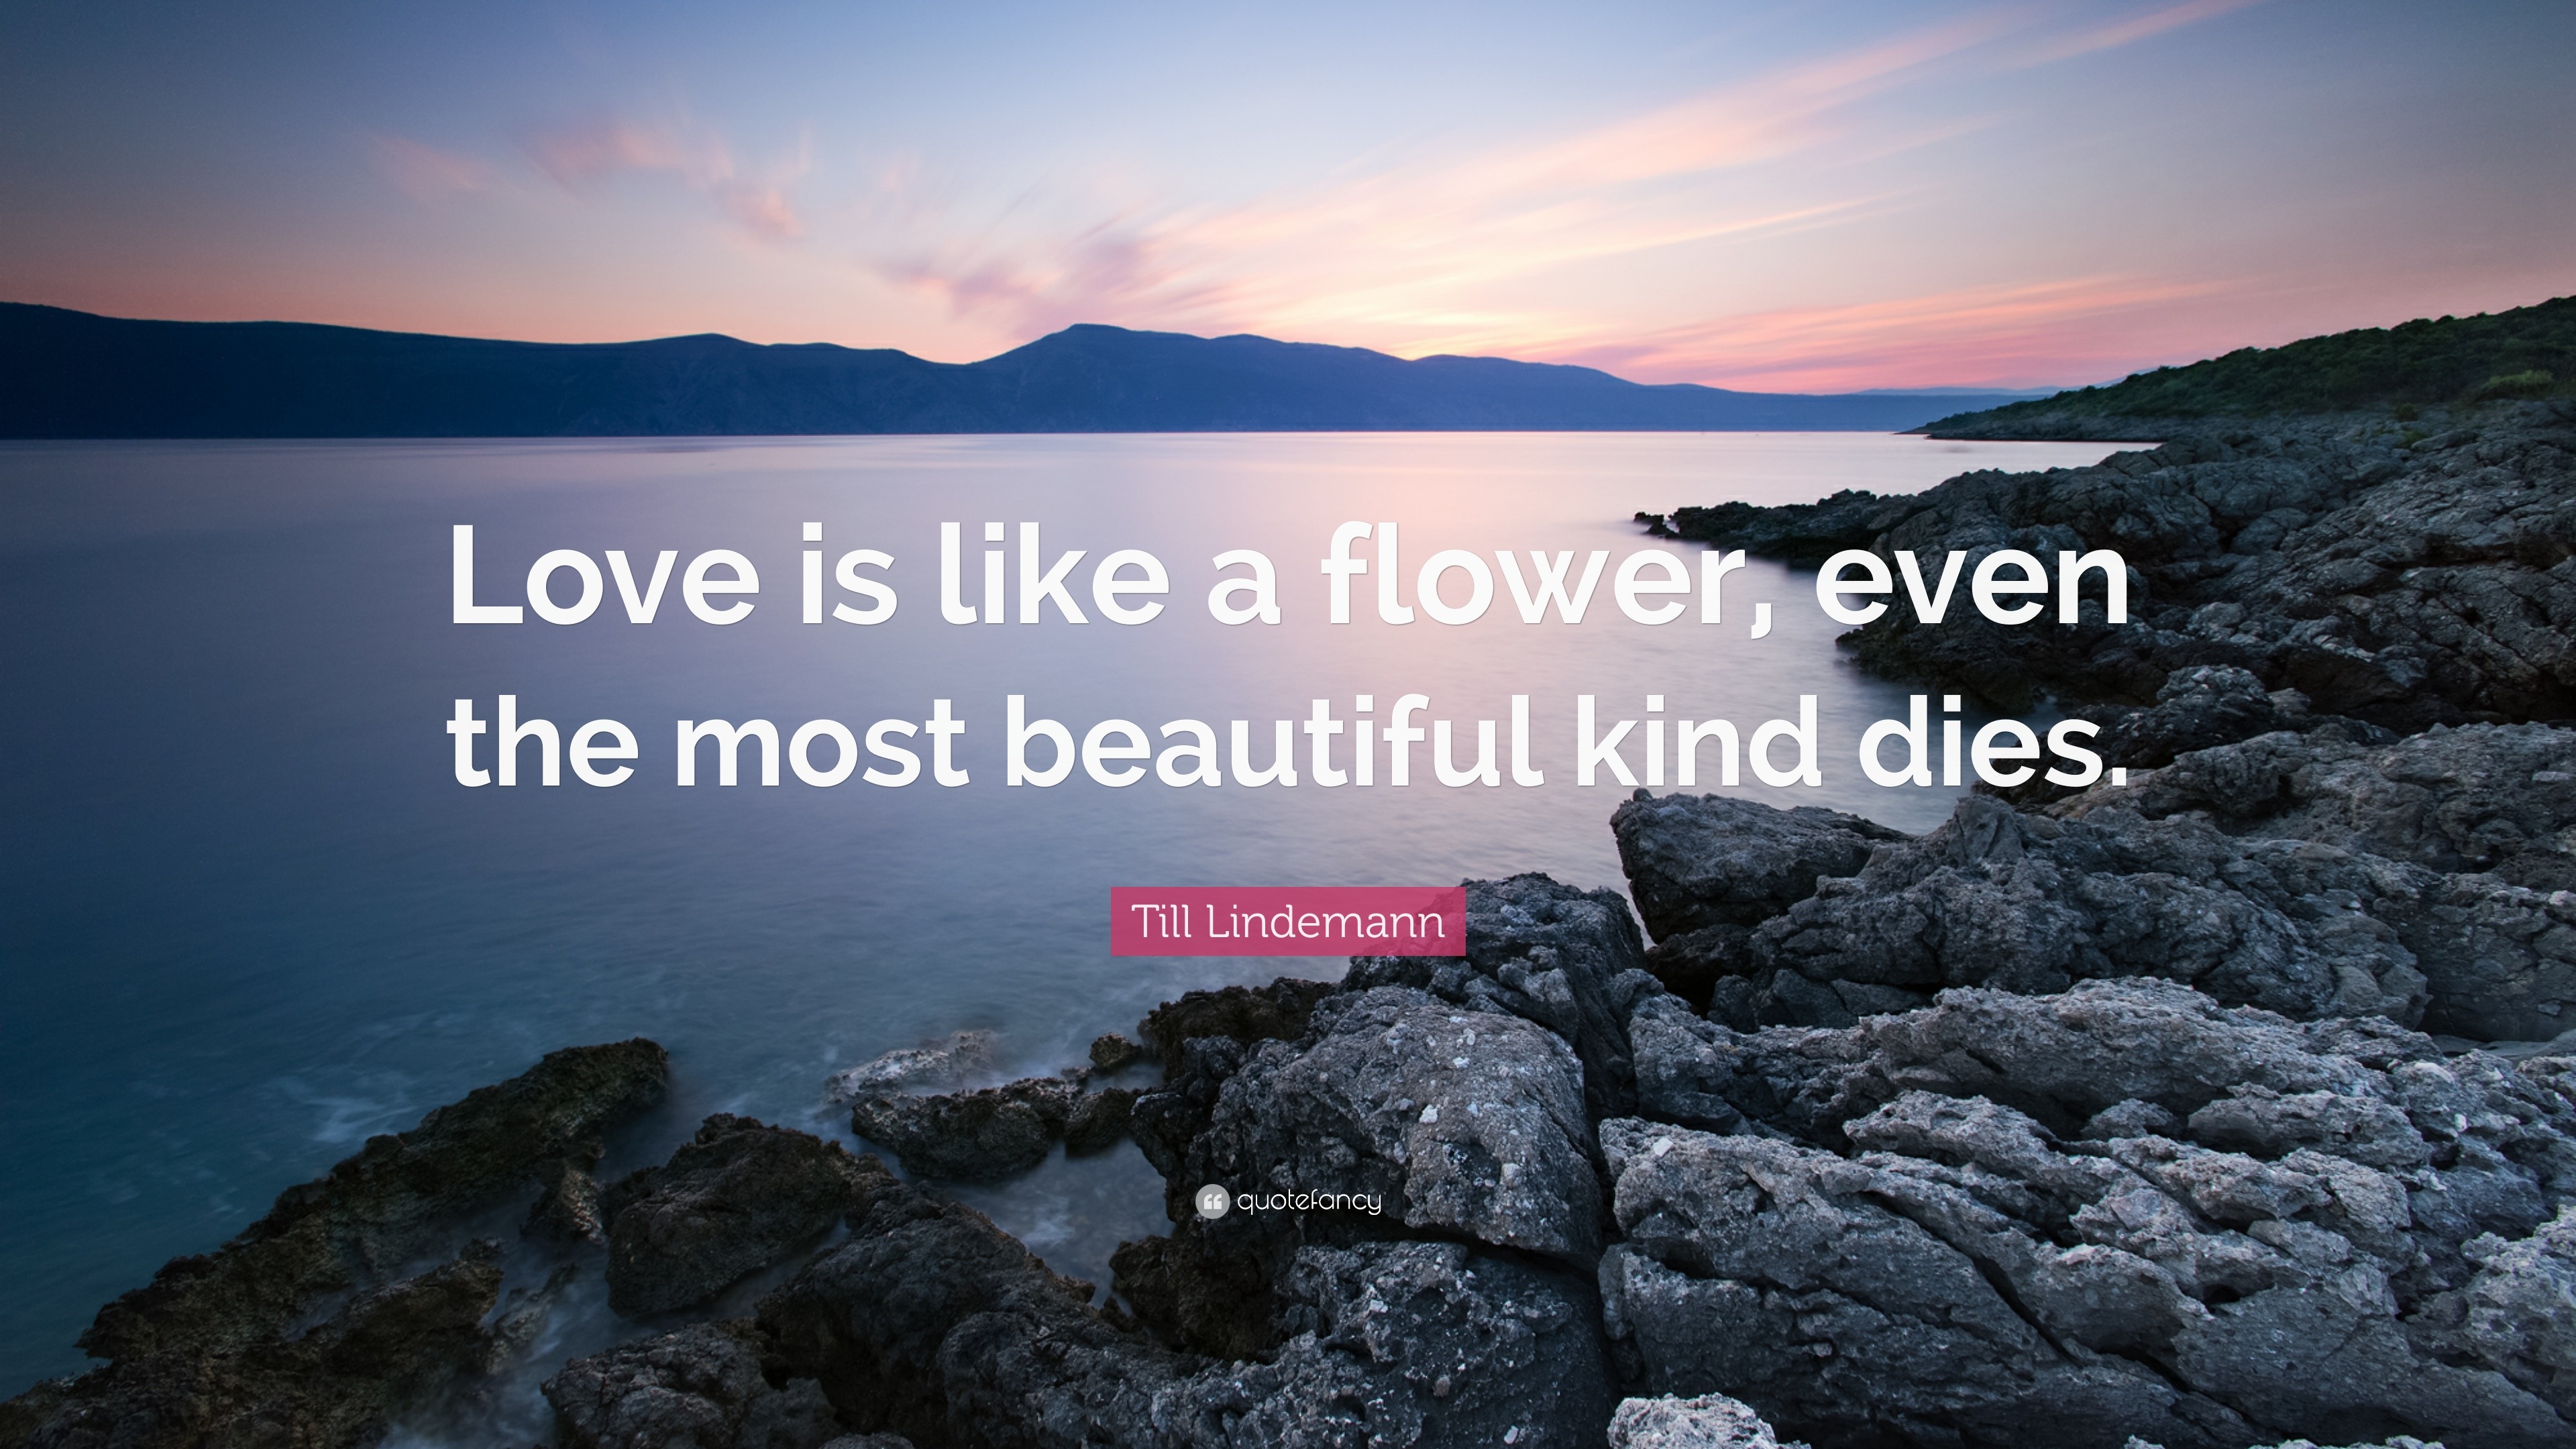 Till Lindemann Quote “Love is like a flower even the most beautiful kind